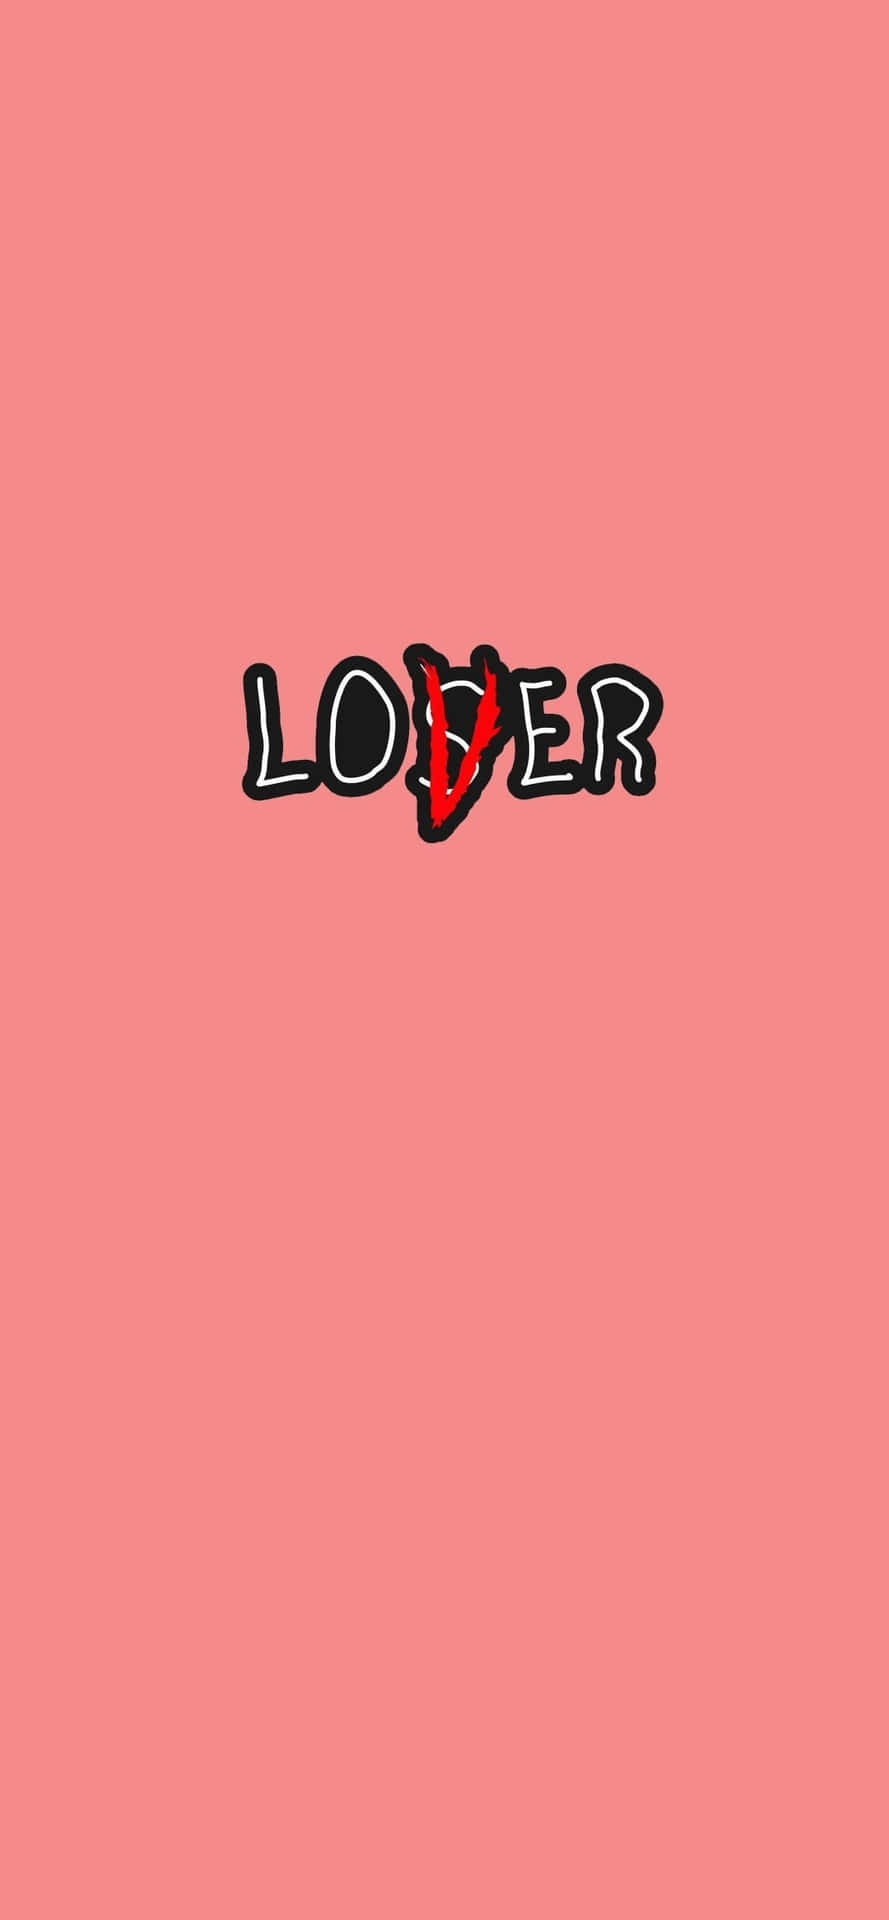 “The beauty in letting go; embracing the power of being a Lover Loser” Wallpaper